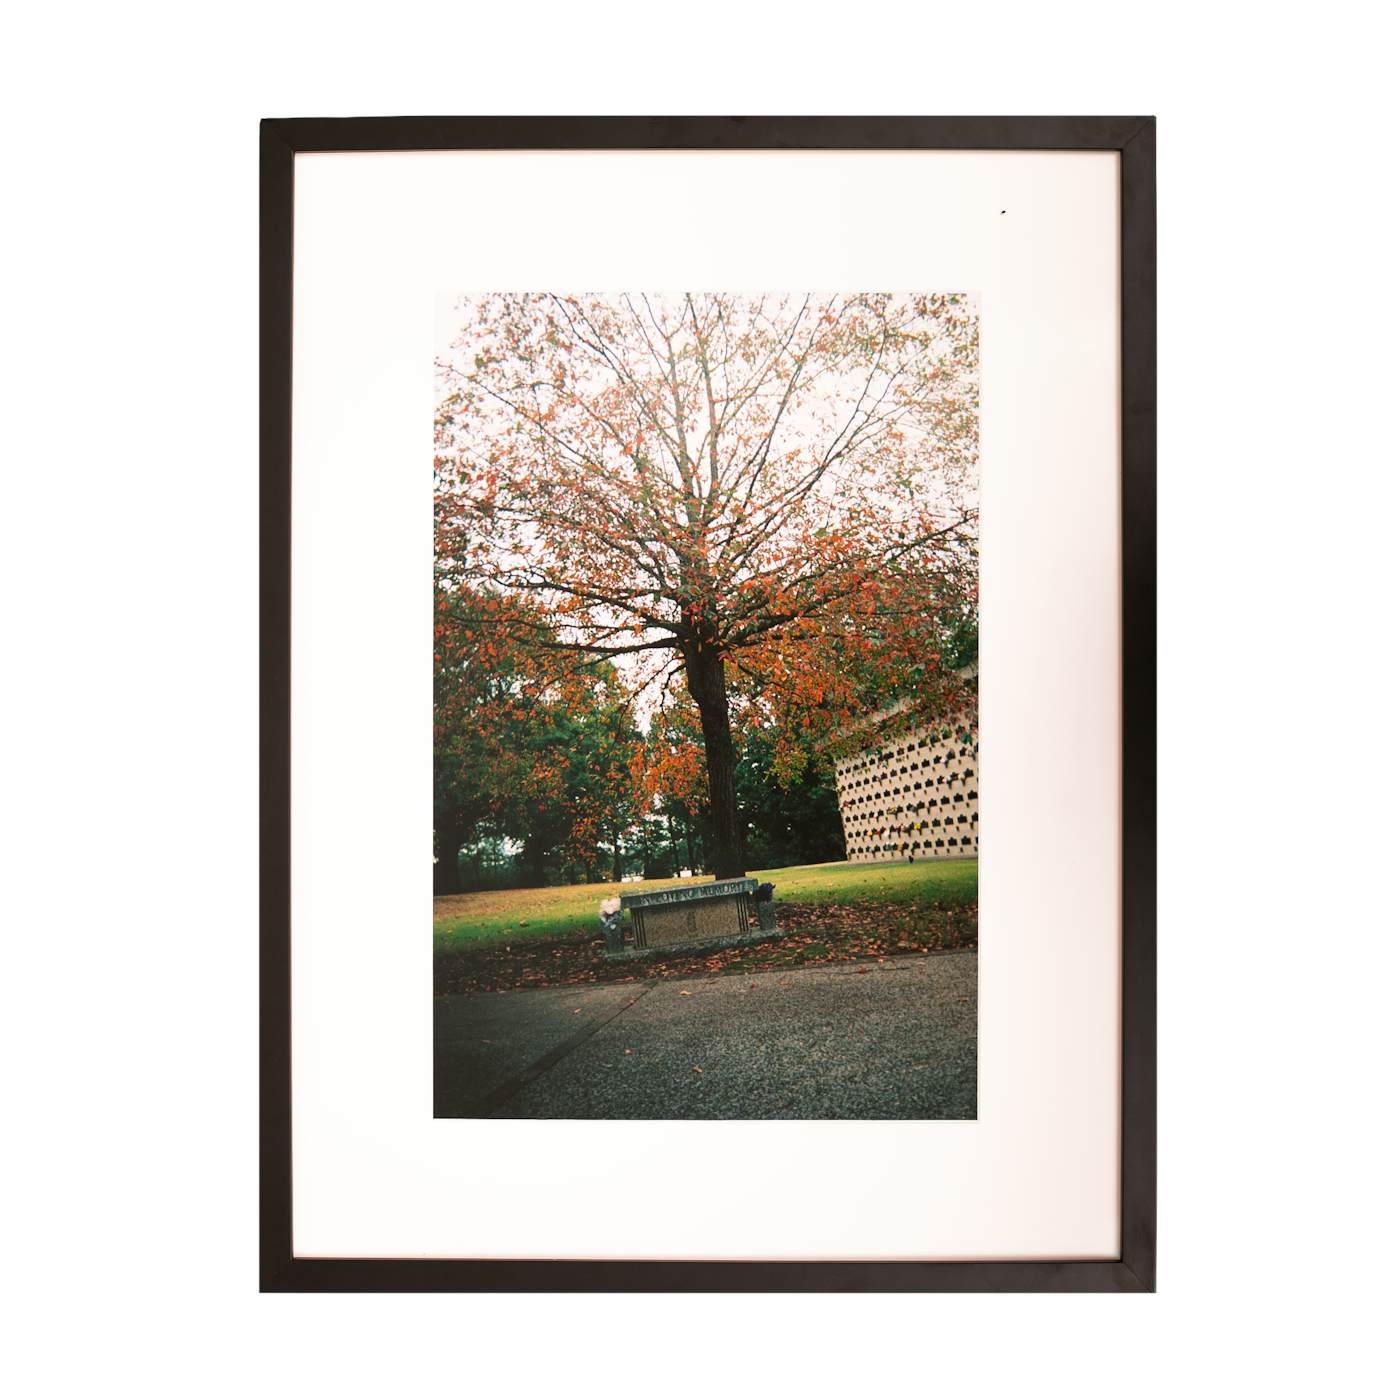 Kevin Morby | Cemetery Tree - Framed Photo